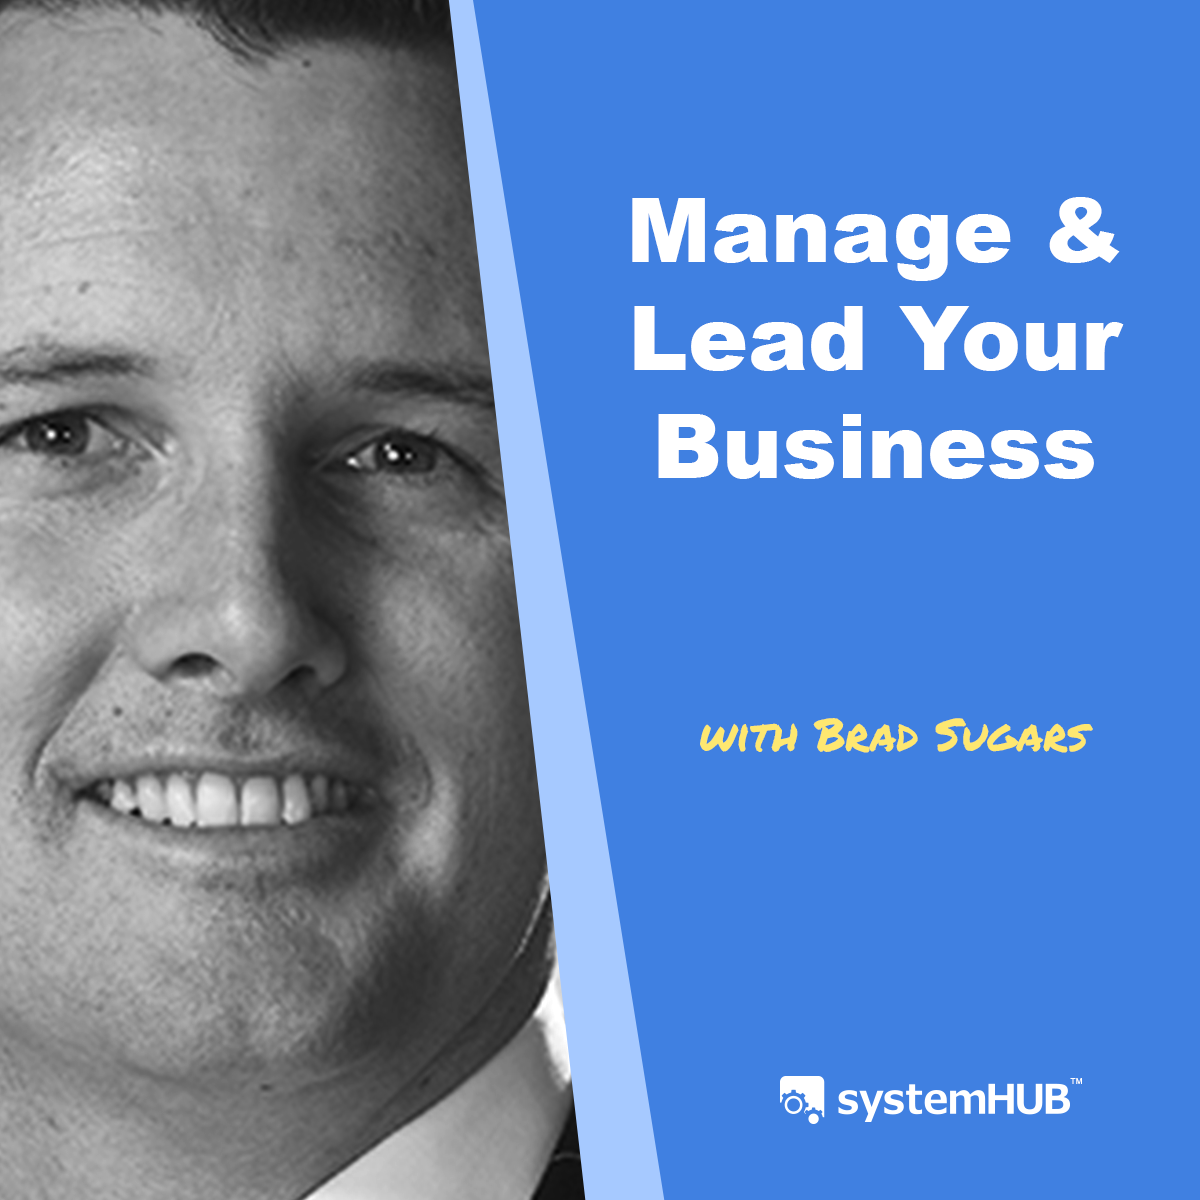 5 Steps to Better Management and Leadership with Brad Sugars